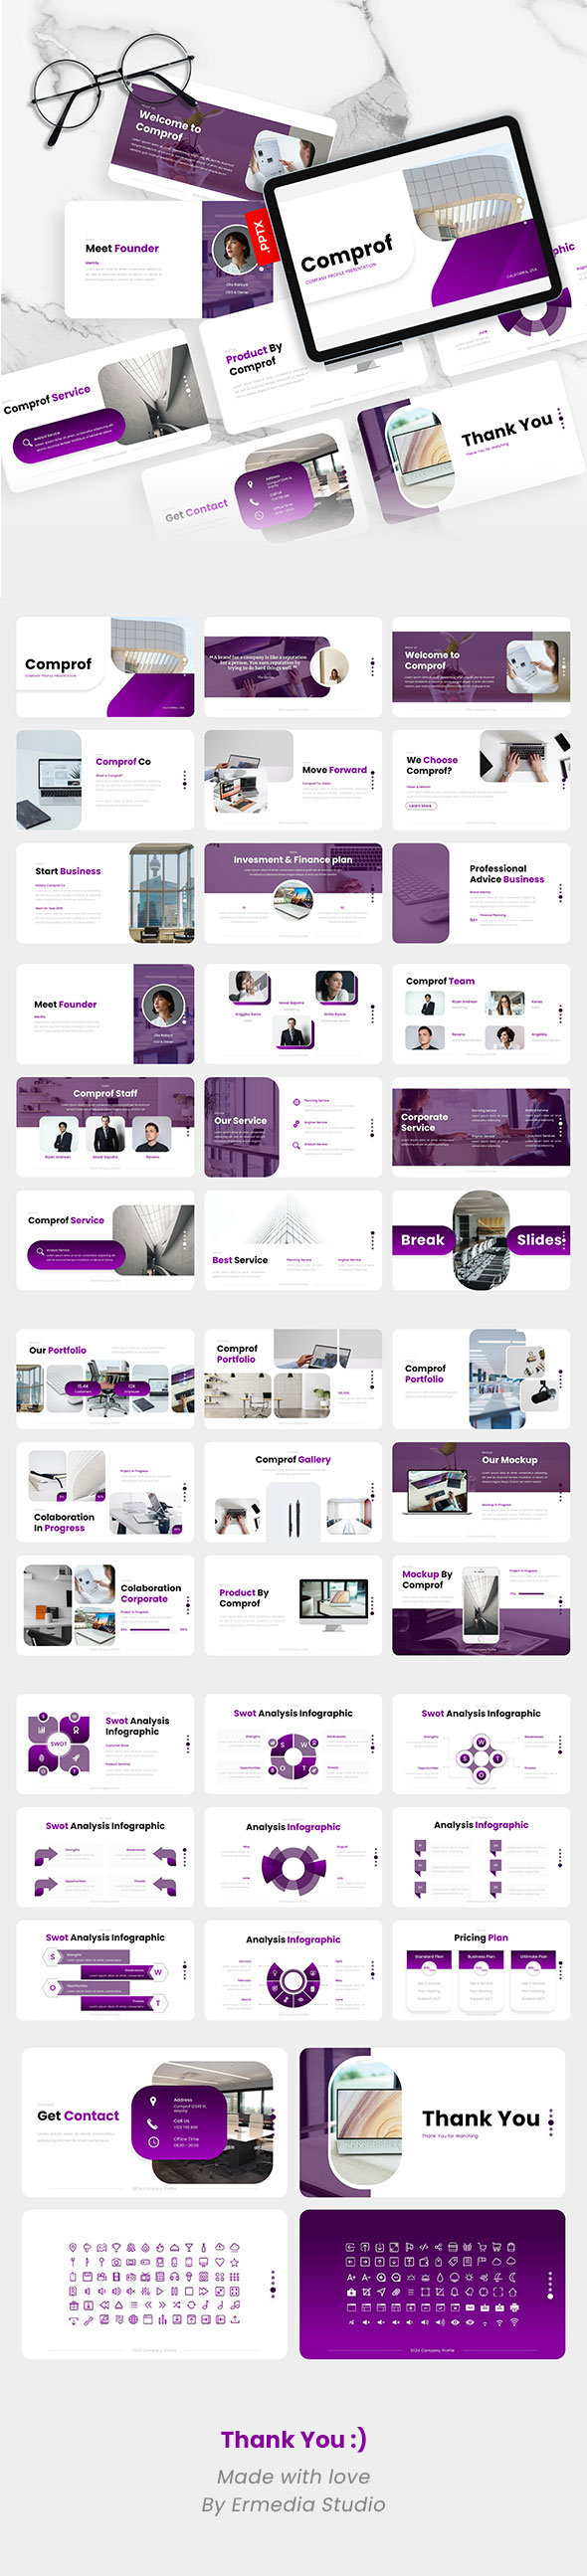 Comprof – Company Profile PowerPoint Template